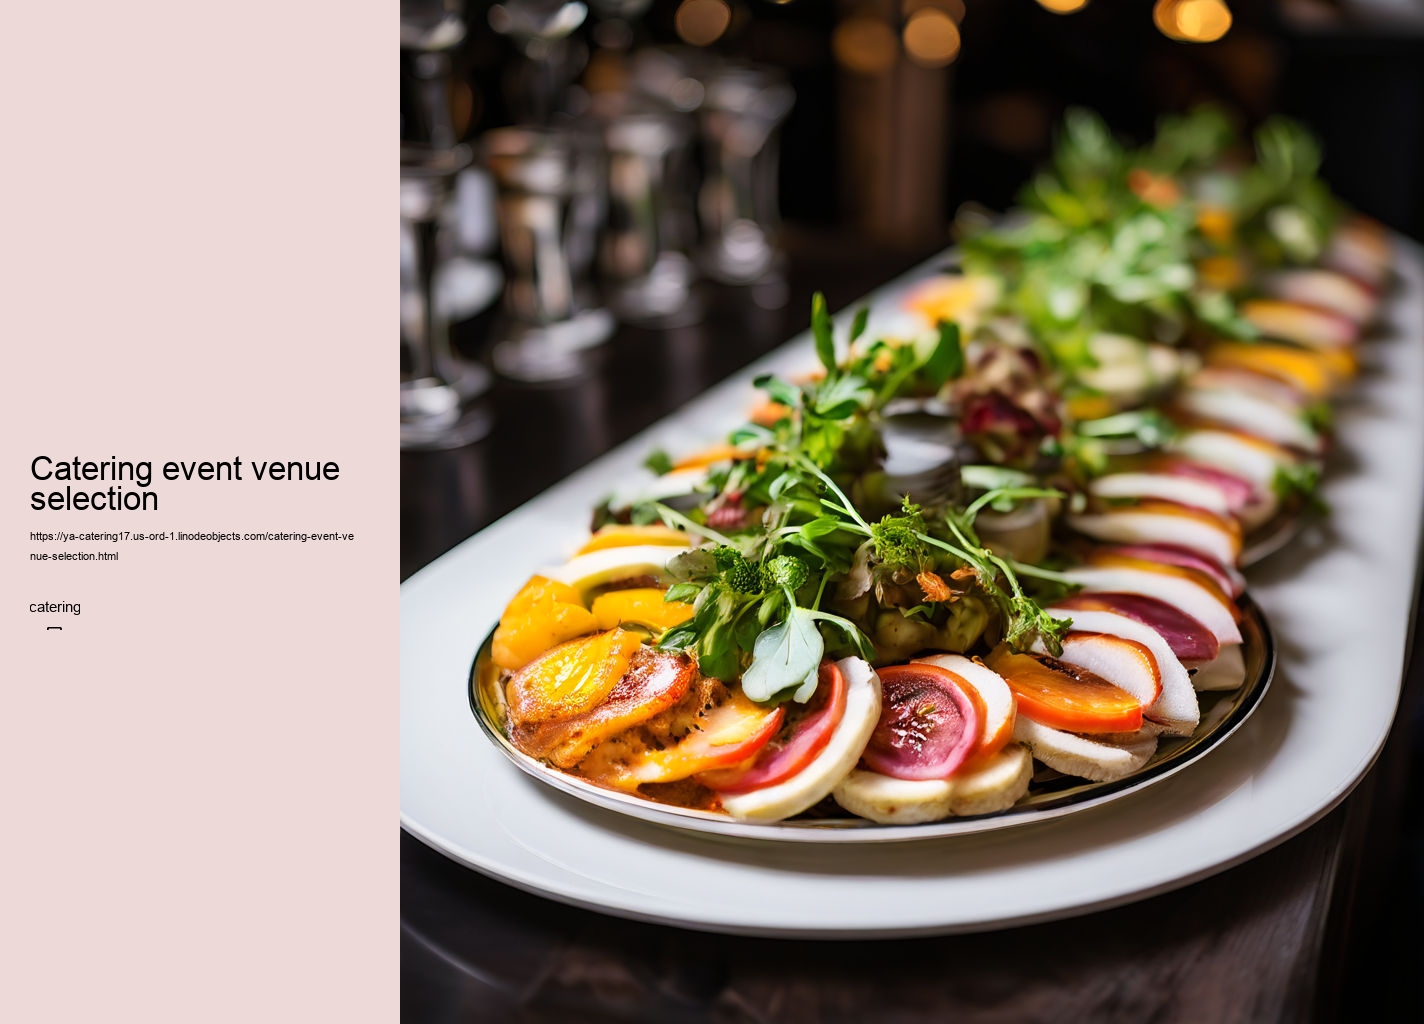 Catering event venue selection